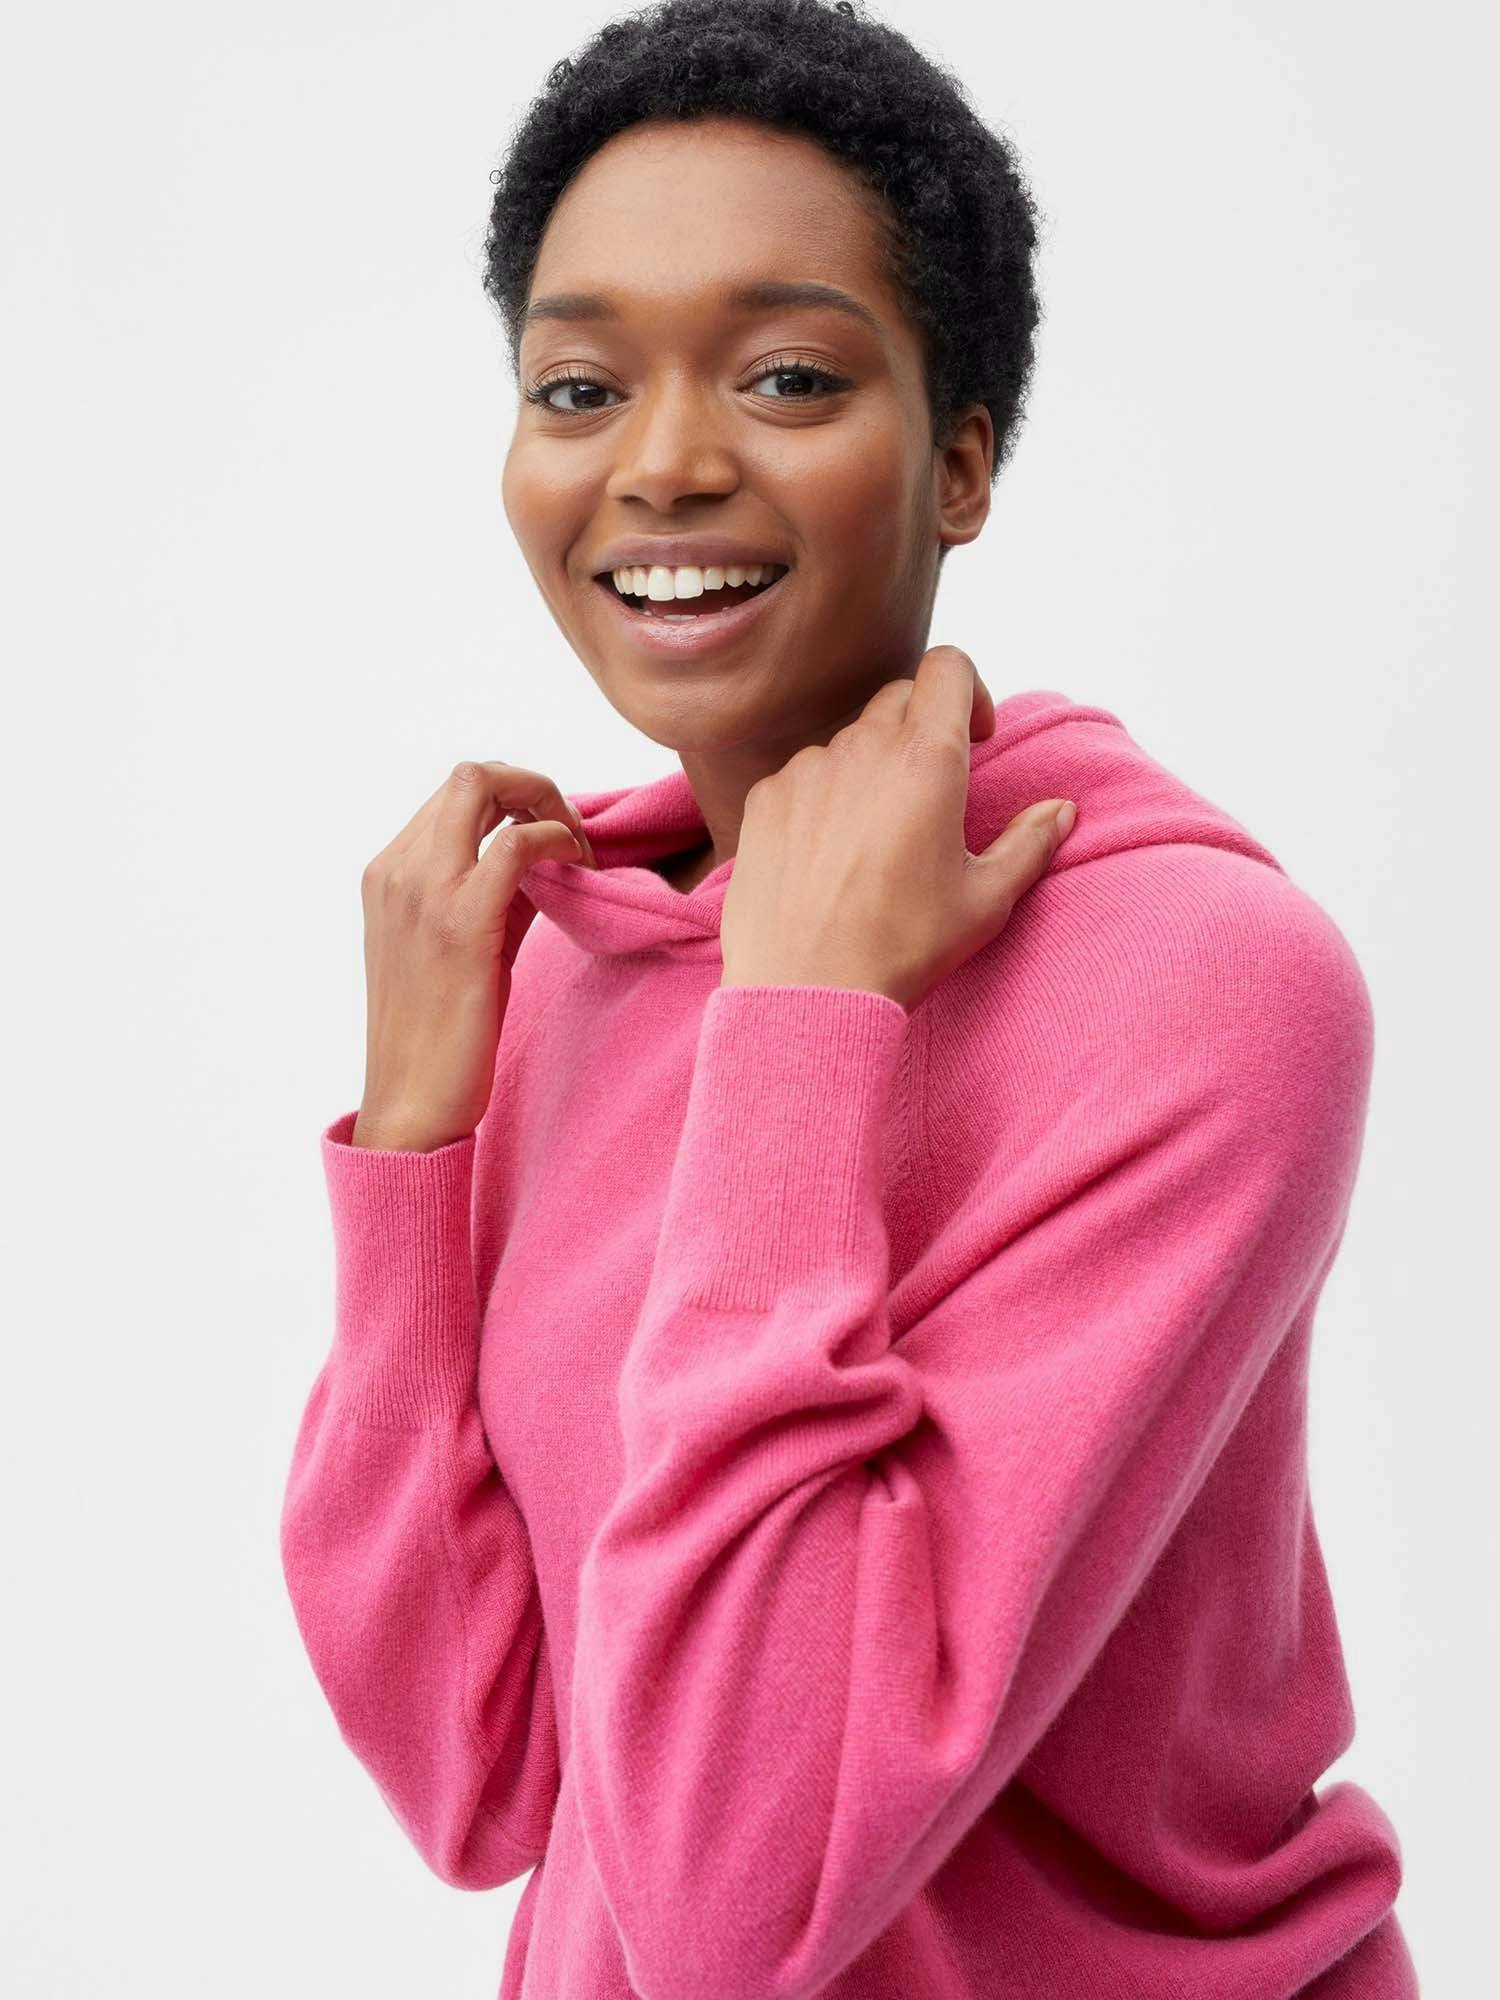 https://cdn.shopify.com/s/files/1/0035/1309/0115/products/Cashmere-Hoodie-Flamingo-Pink-Female-Model-4.jpg?v=1671726306